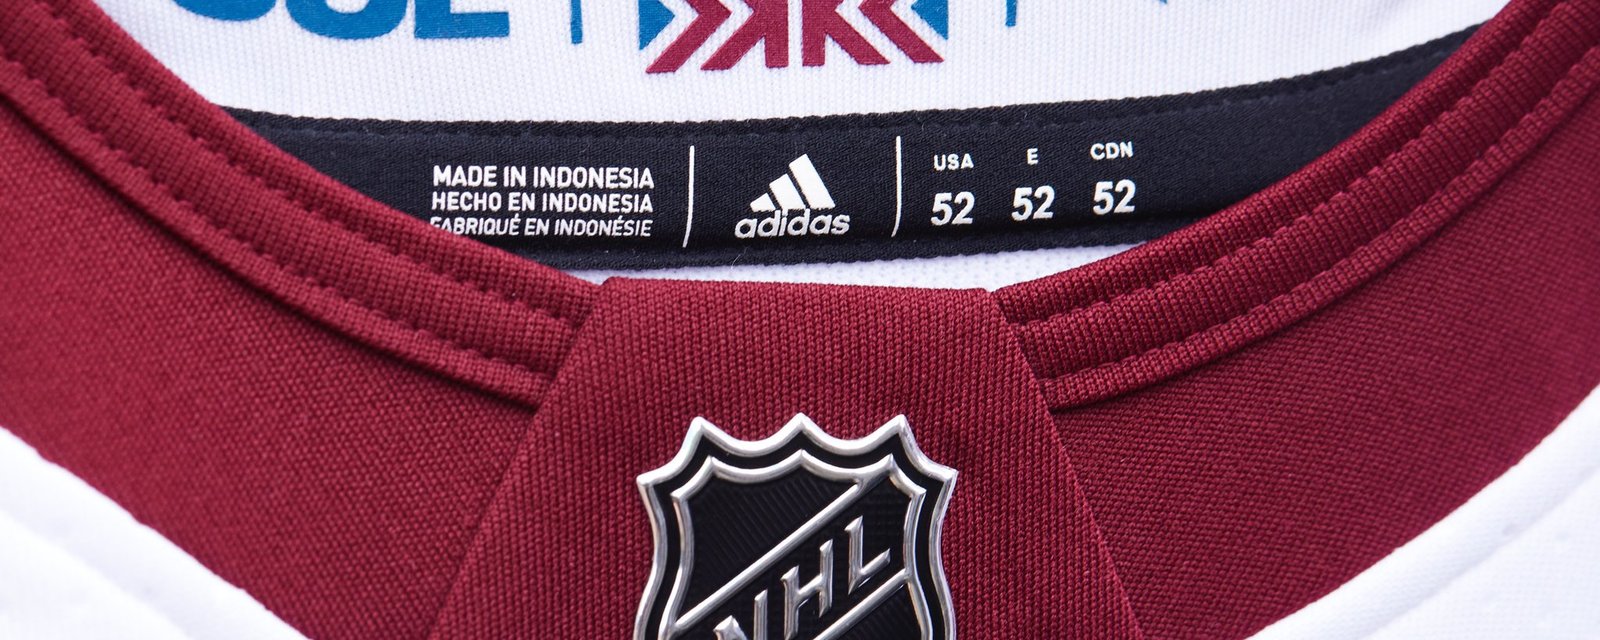 Colorado Avalanche getting backlash from fans in Quebec over new “reverse retro” jersey.